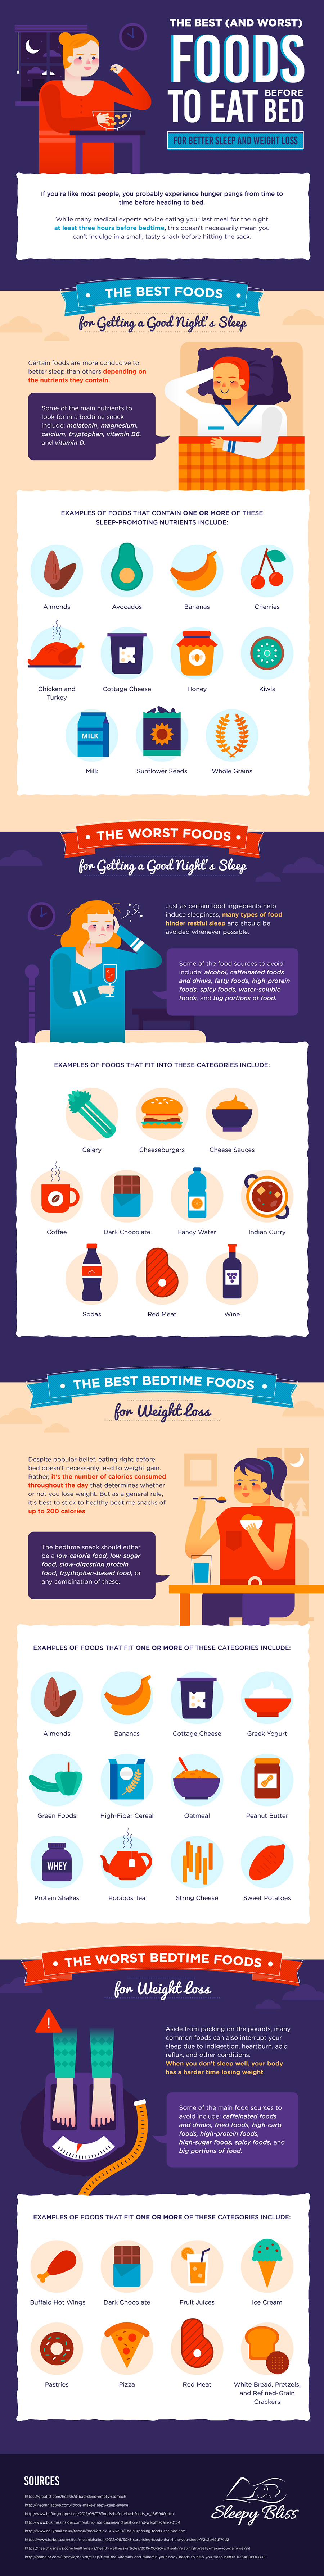 Infographic for The Best (And Worst) Foods to Eat Before Bed